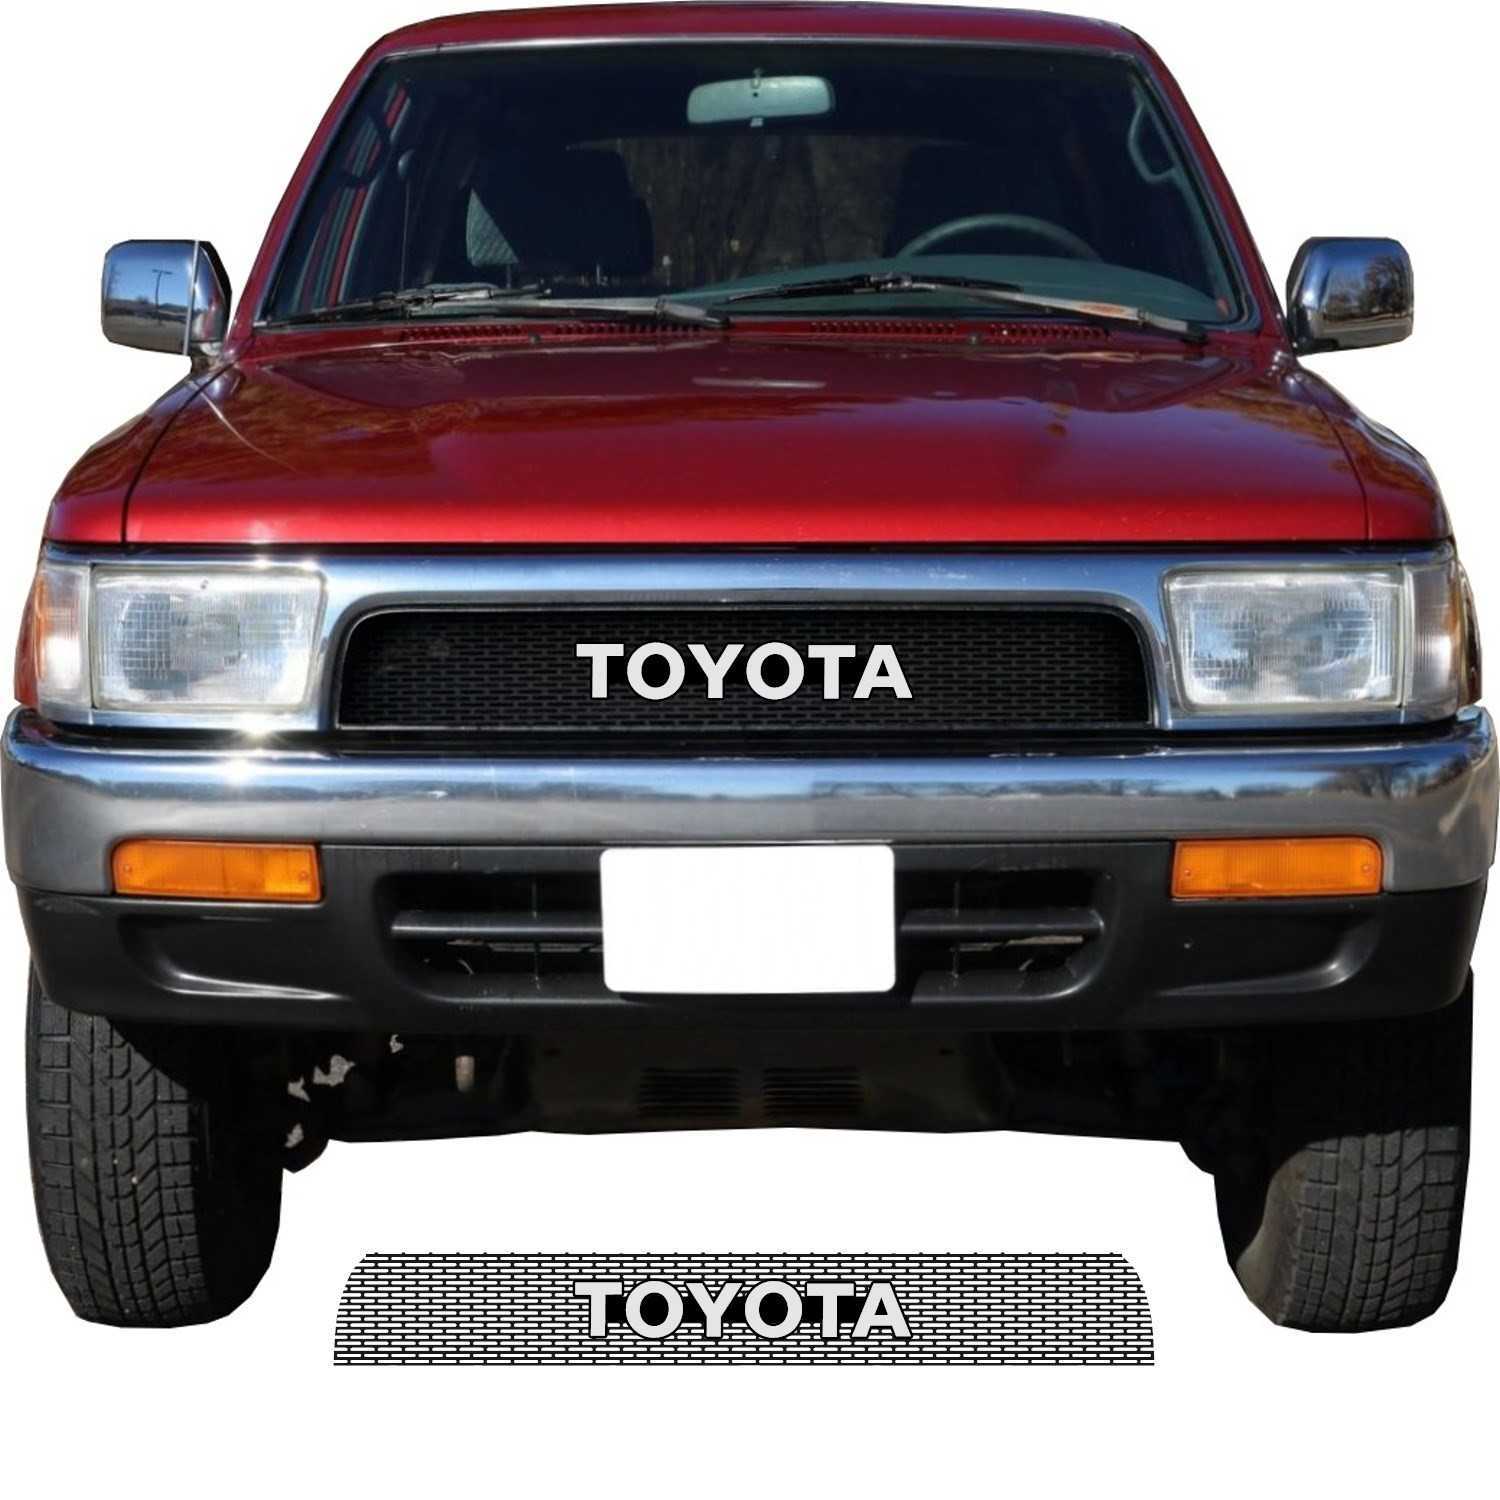 1992 - 1995 Toyota 4Runner Grill Mesh With Toyota Emblem #1